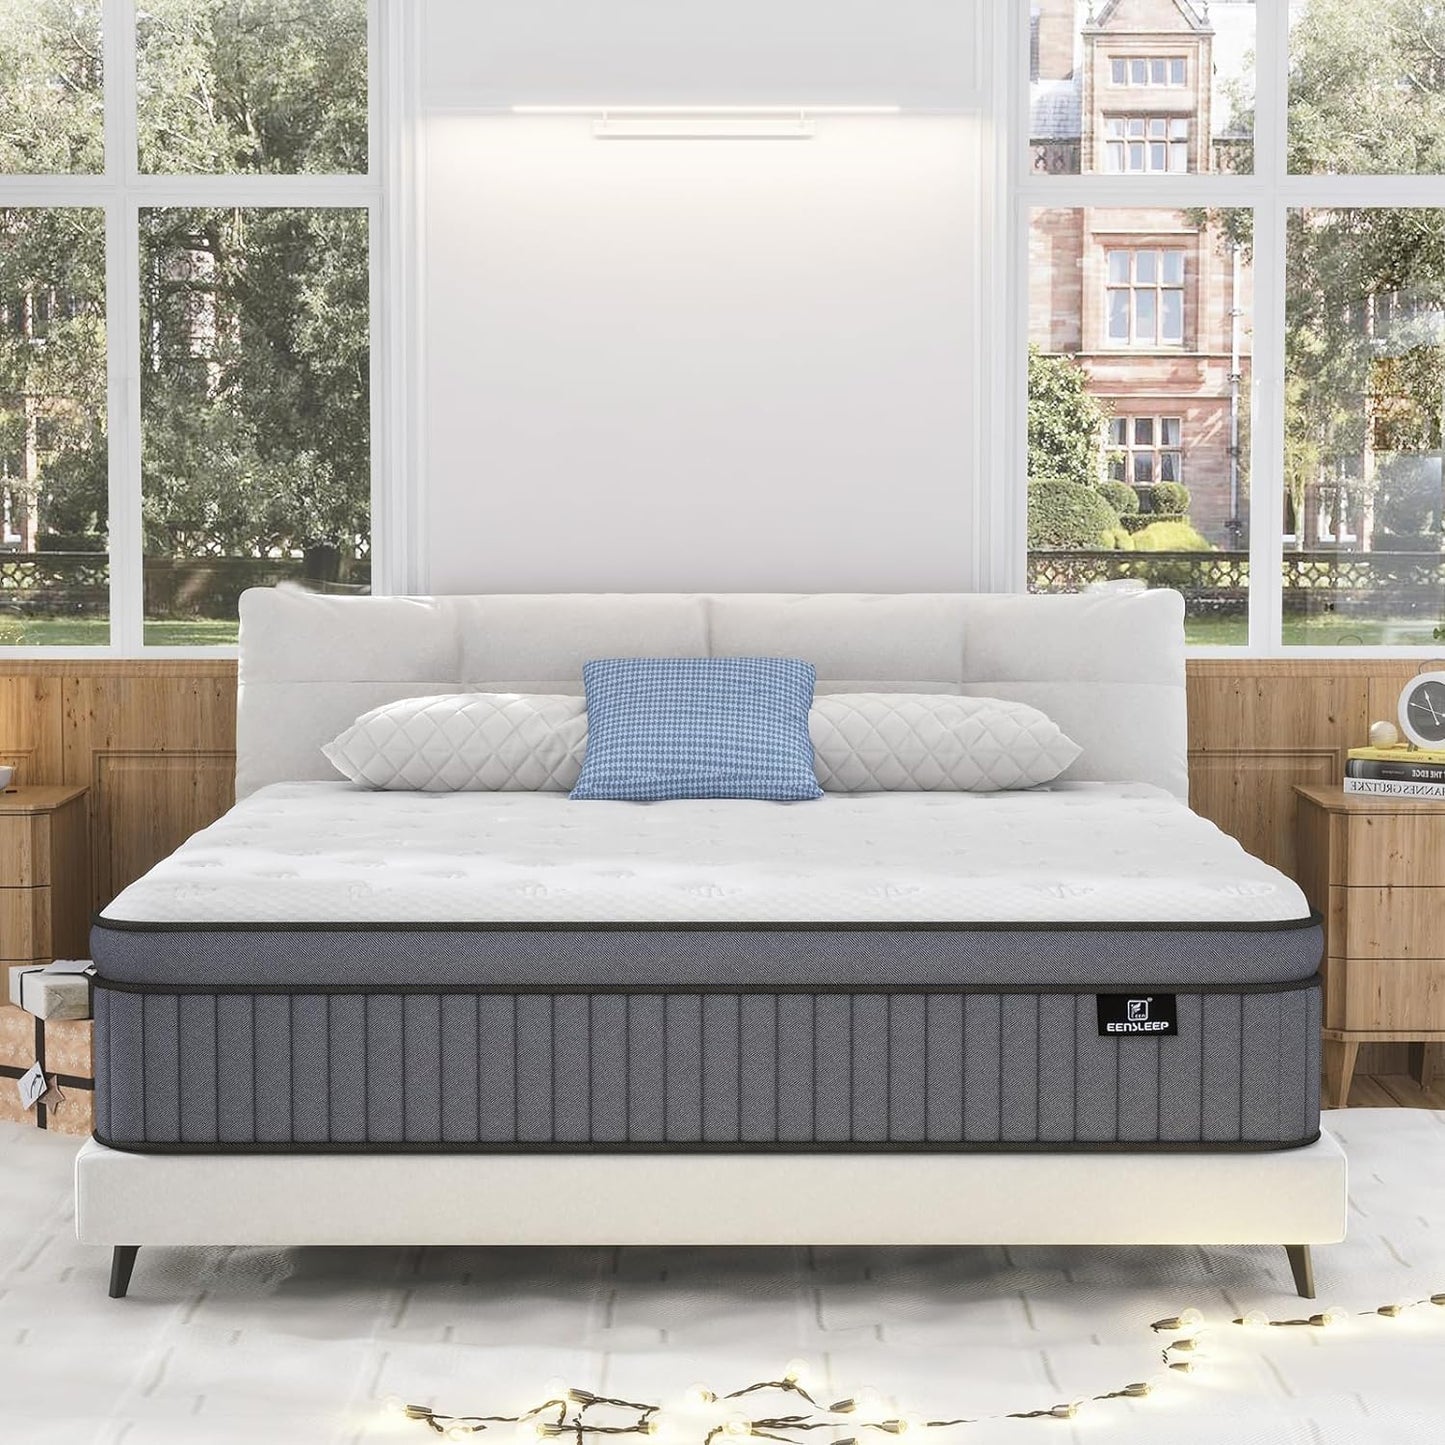 EEN EEN SLEEP King Size Mattress - Upgrade Strengthen - 12 Inch Hybrid King Mattress in a Box, Mattress King Size with High density Memory Foam and Independent Pocket Springs, Strong Edge Support,Firm